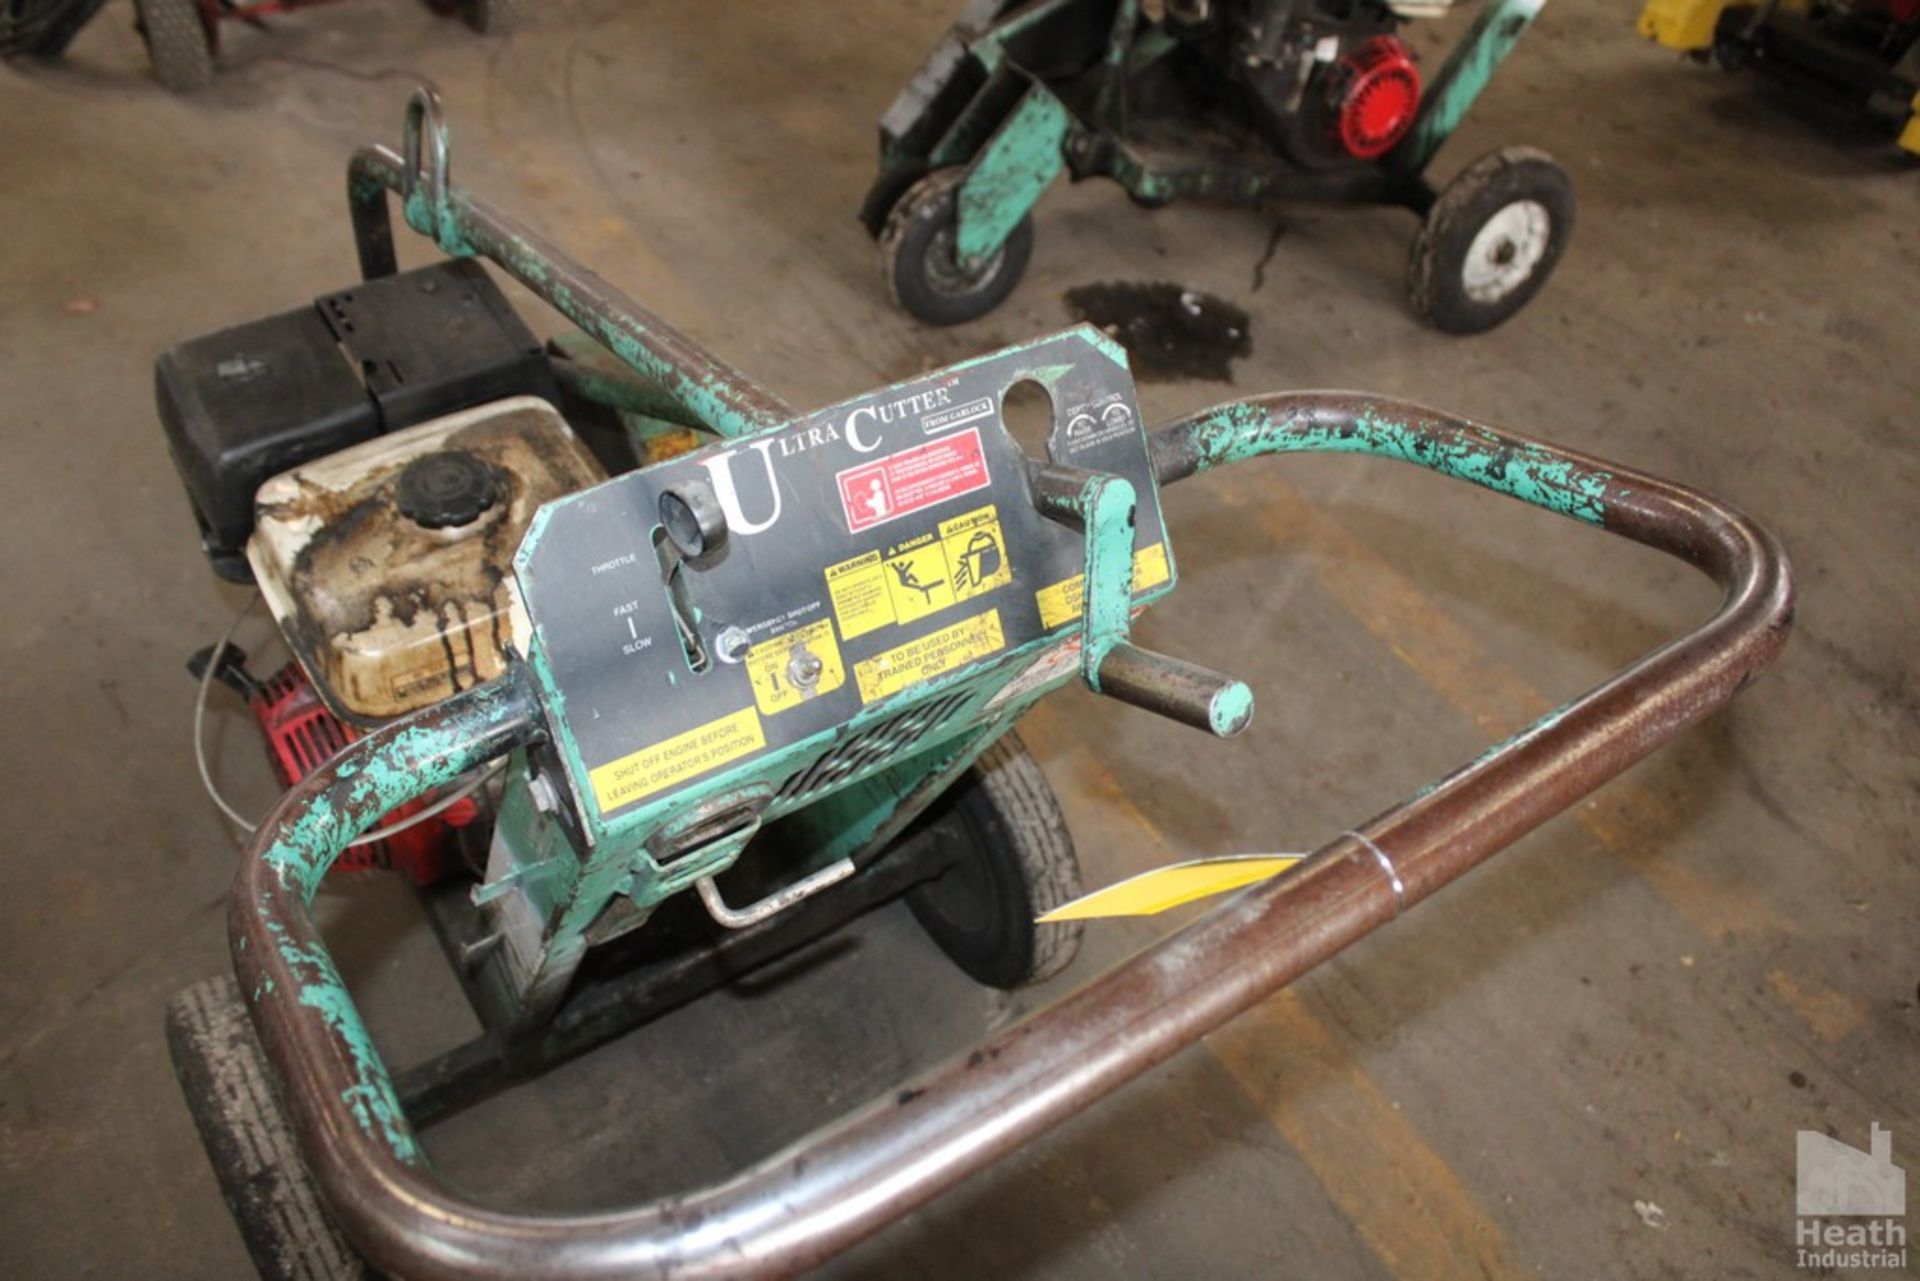 GARLOCK ULTRA CUTTER ROOFING SAW WITH HONDA GX270 GAS ENGINE - Image 4 of 4